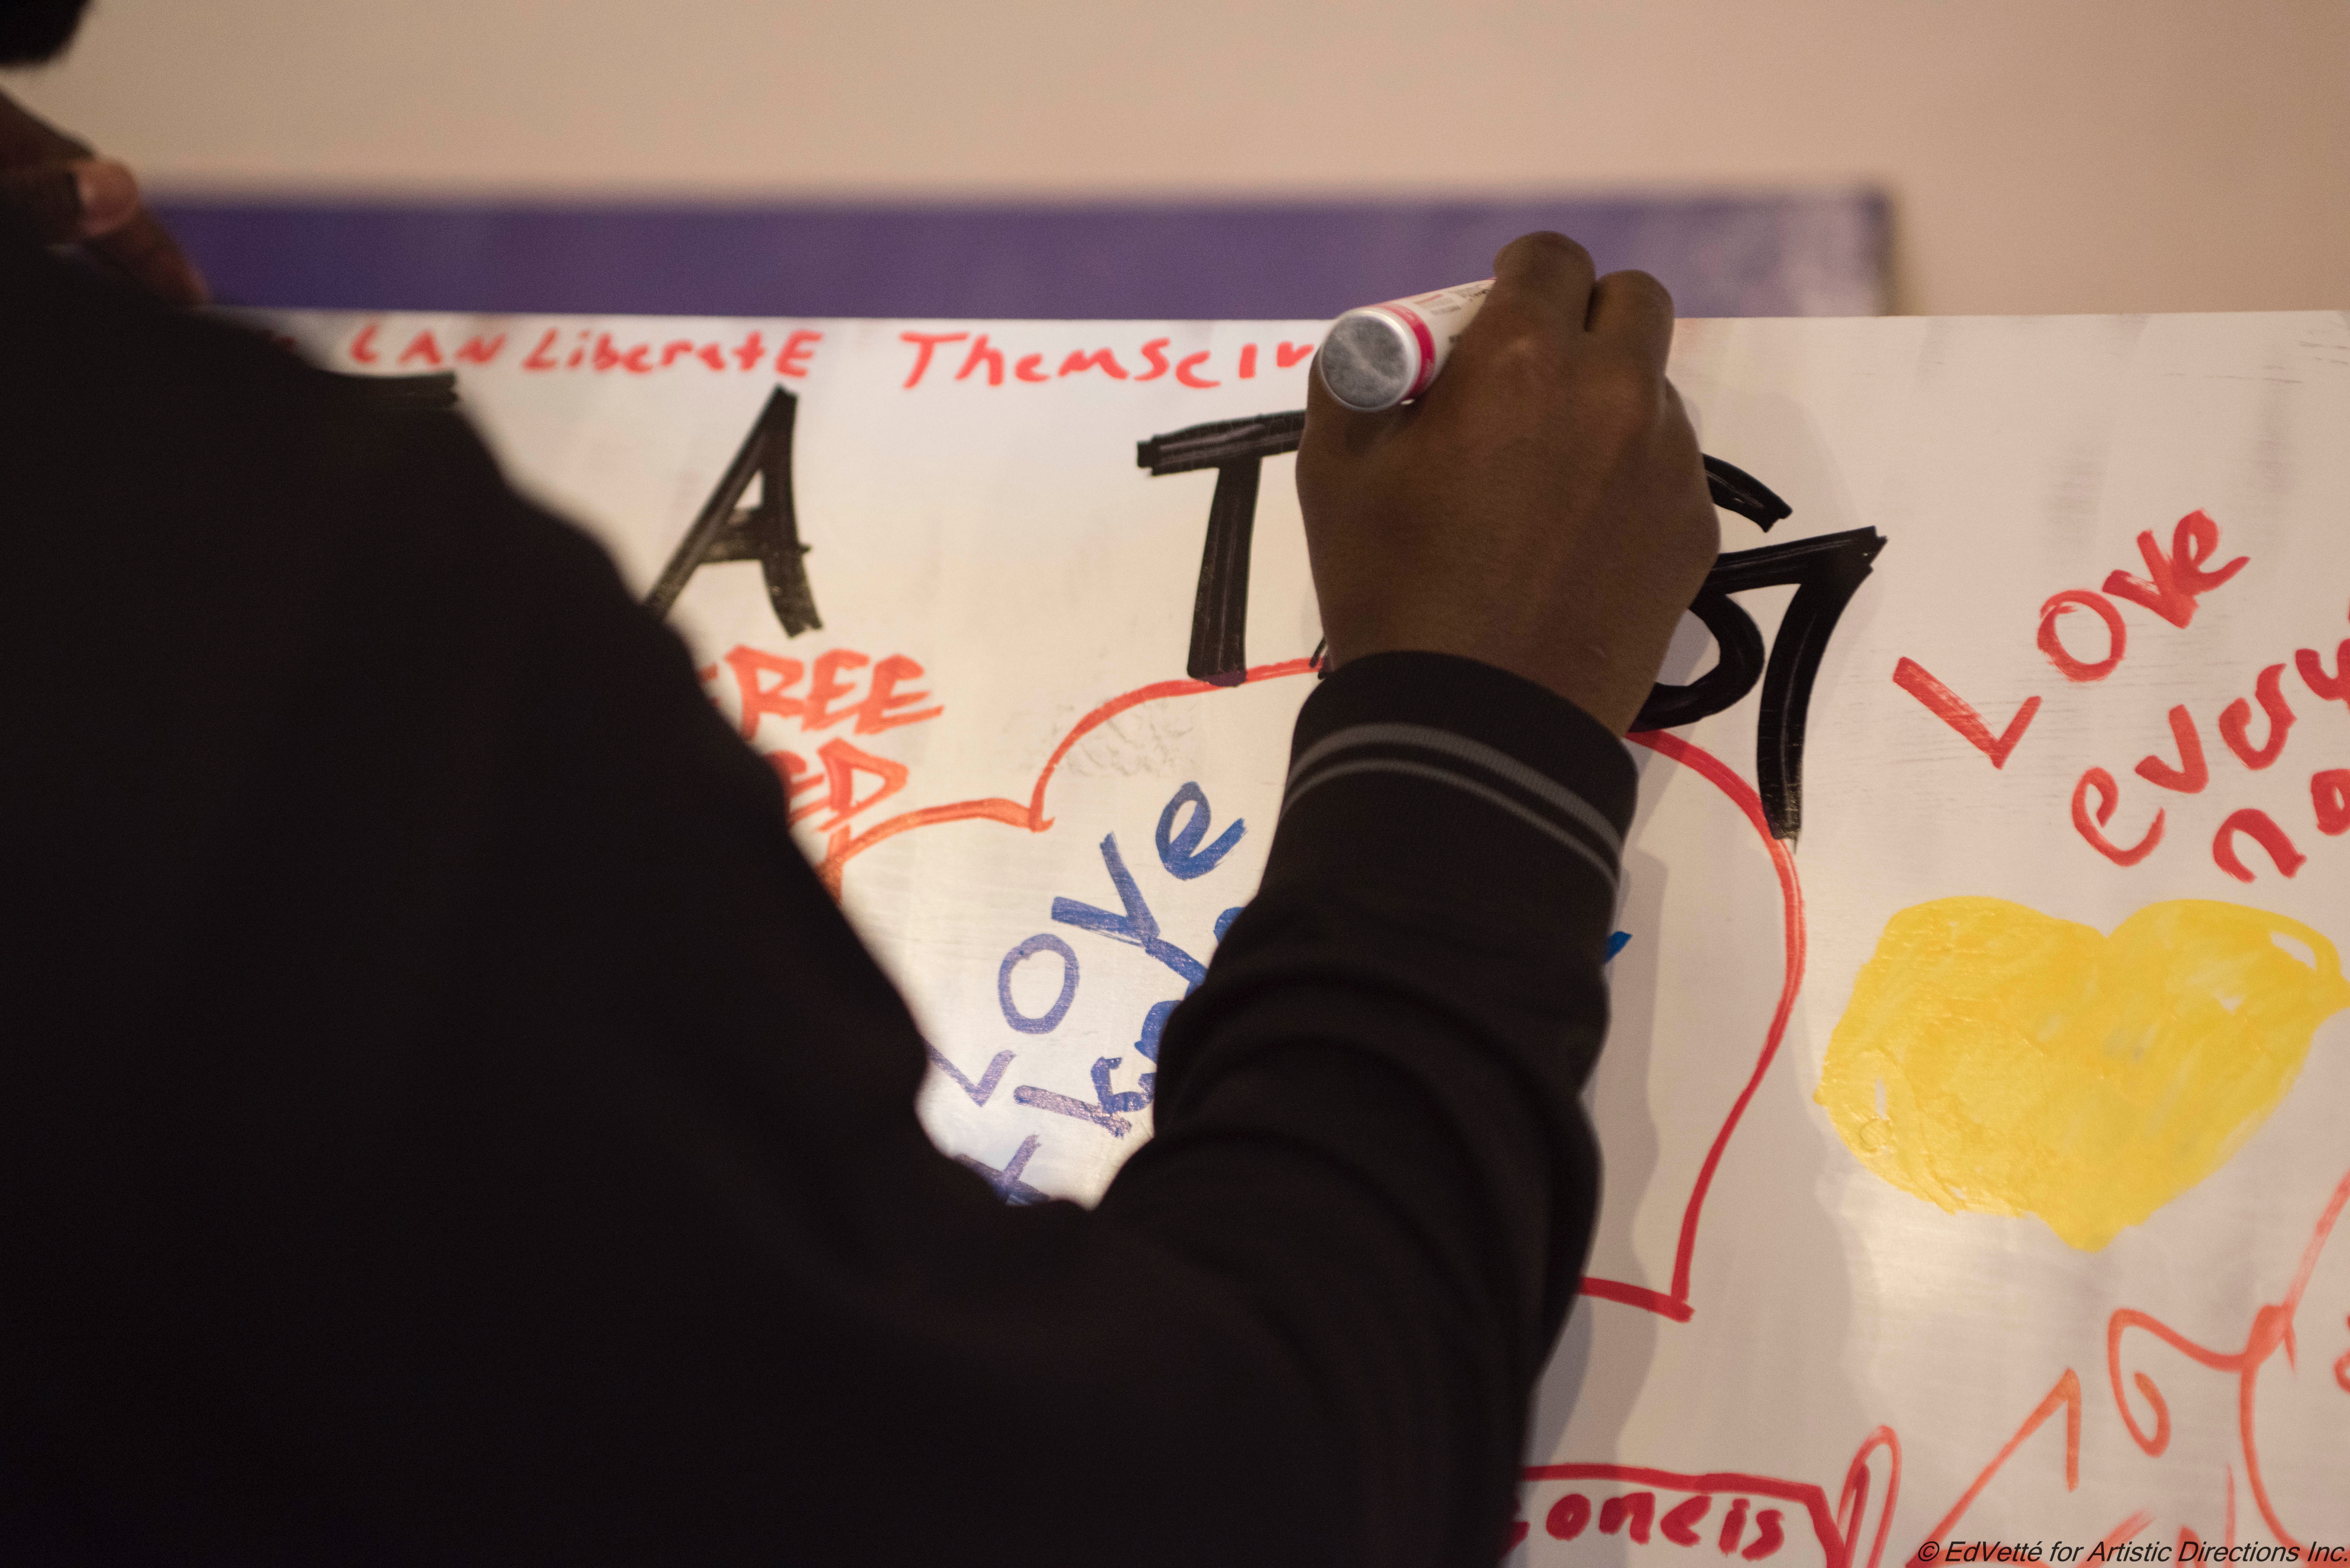 A hand is positioned atop a white canvas while filling in text on community canvas during culminating event for first session of Envisioning Justice at Circles and Ciphers.